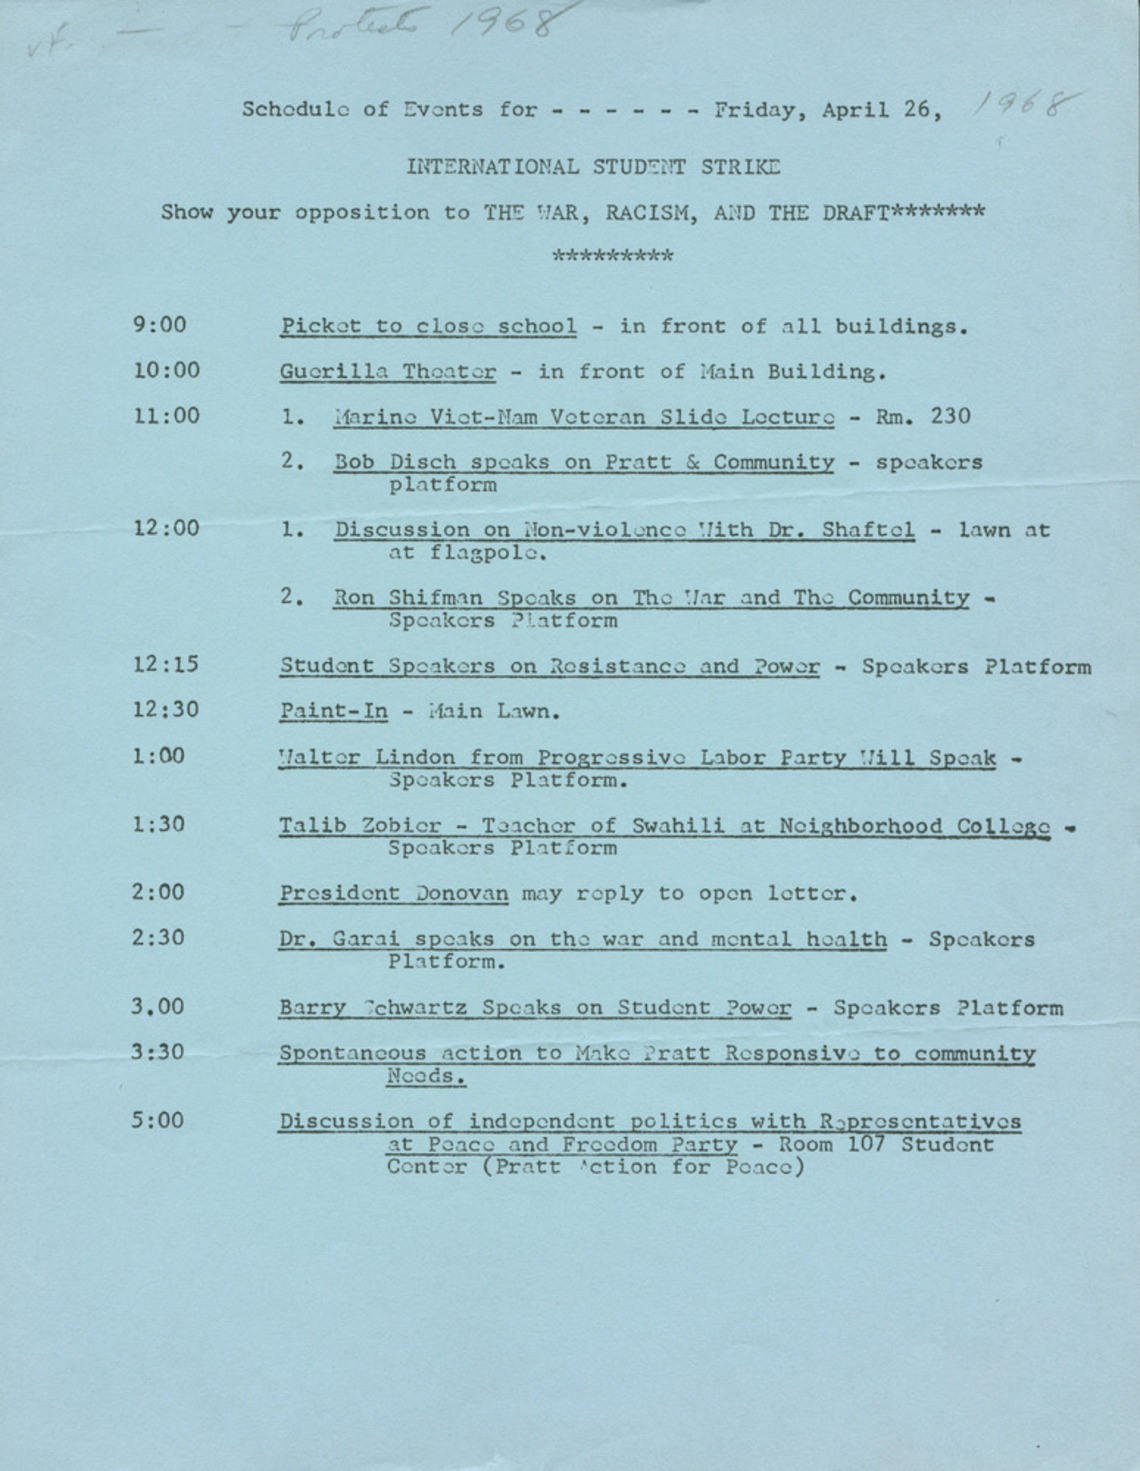 Schedule of Events for April 26, 1968 International Student Strike